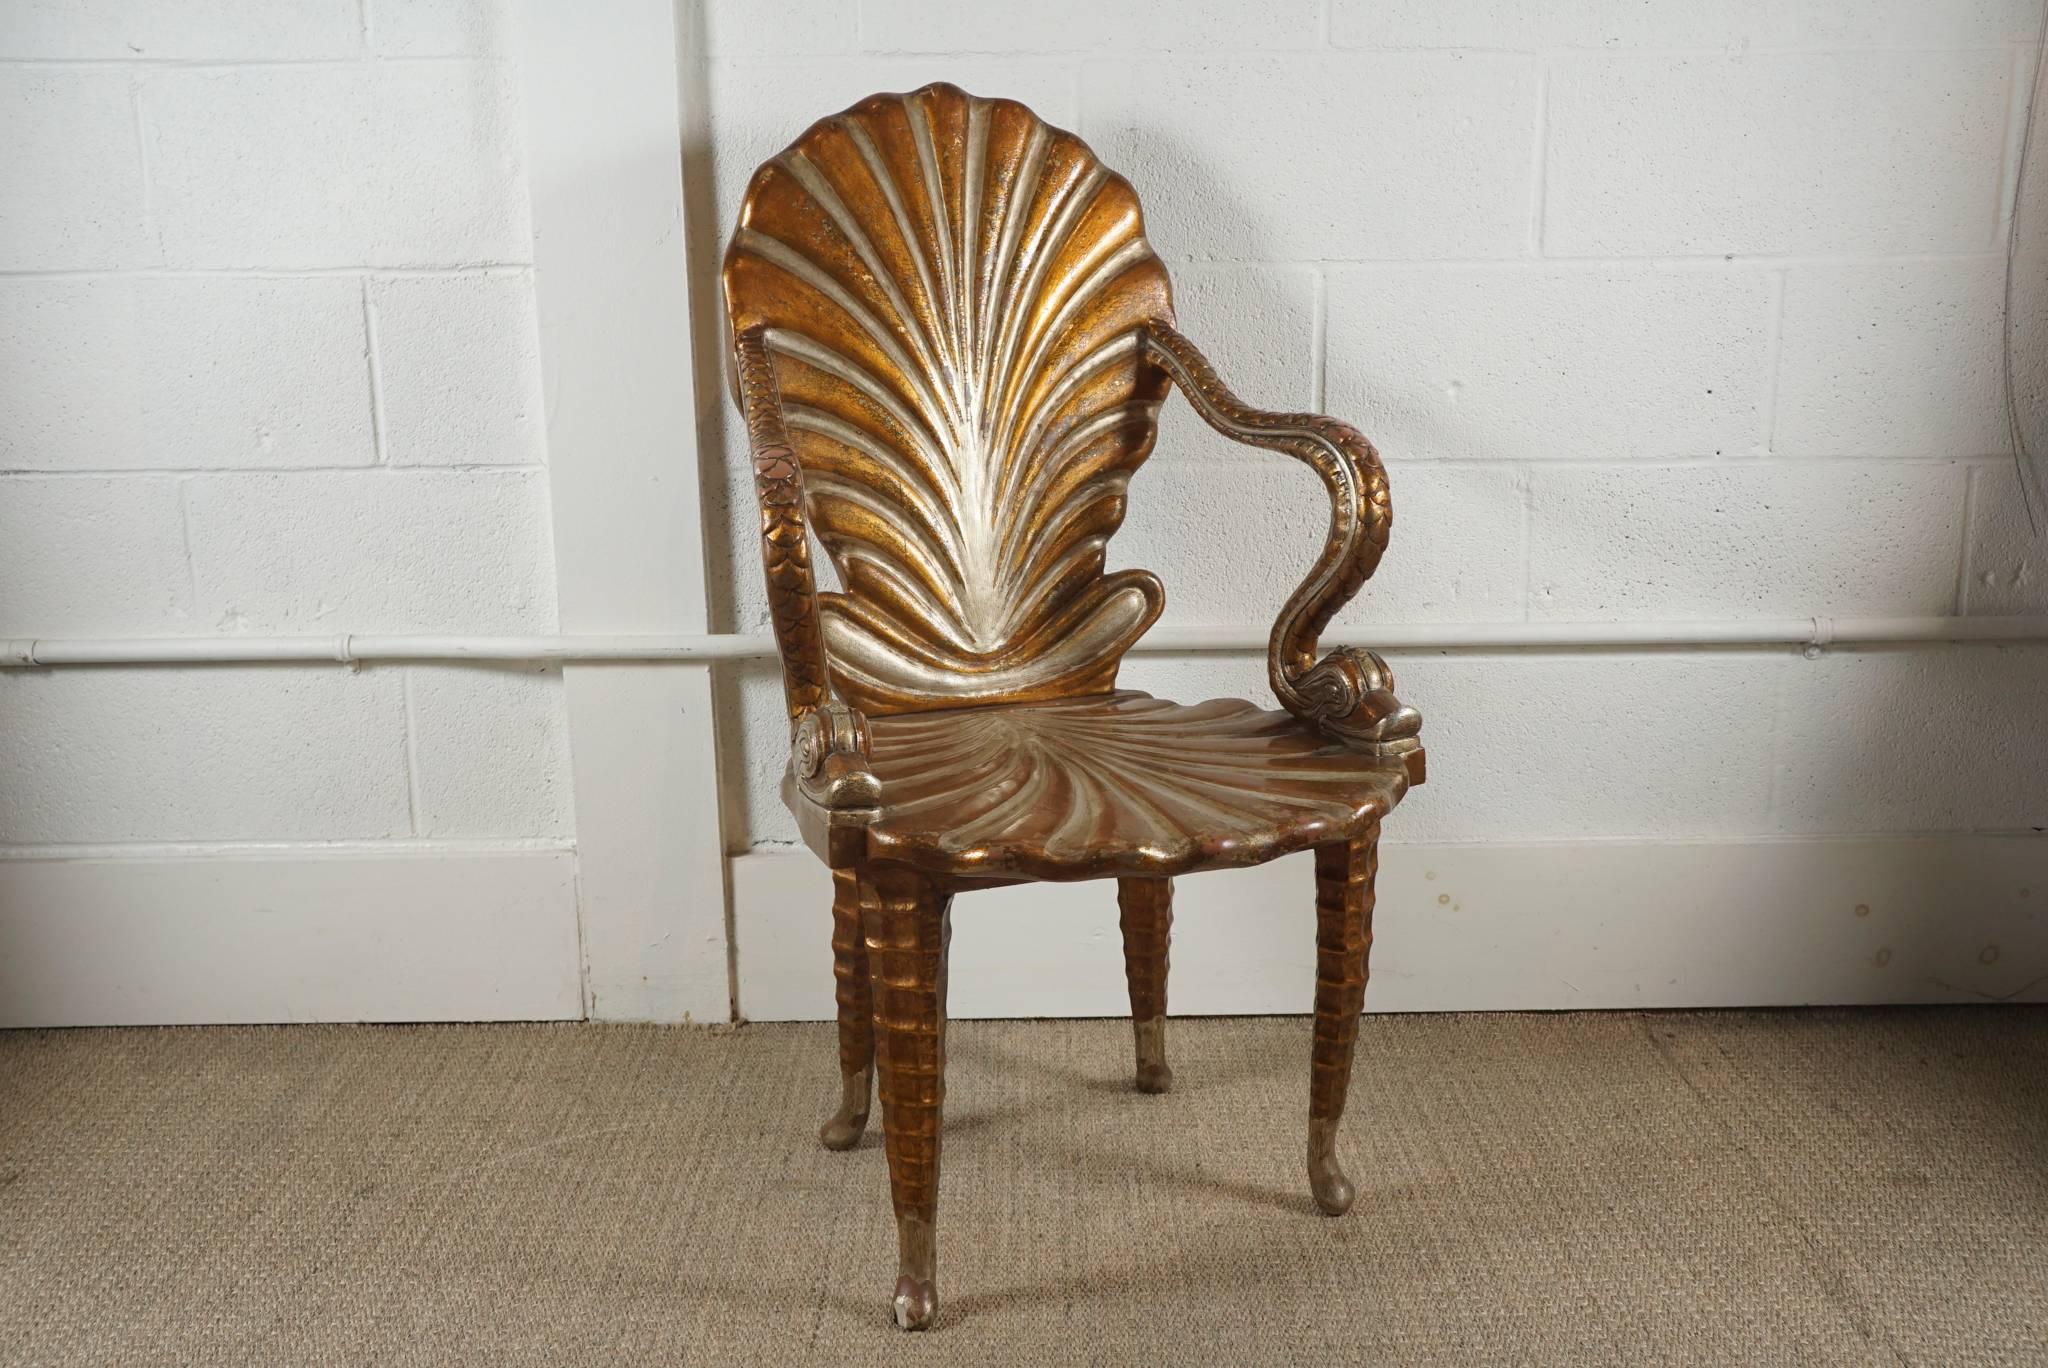 Here is a beautiful grotto shell chair in wood with a gilt and silvered finish.